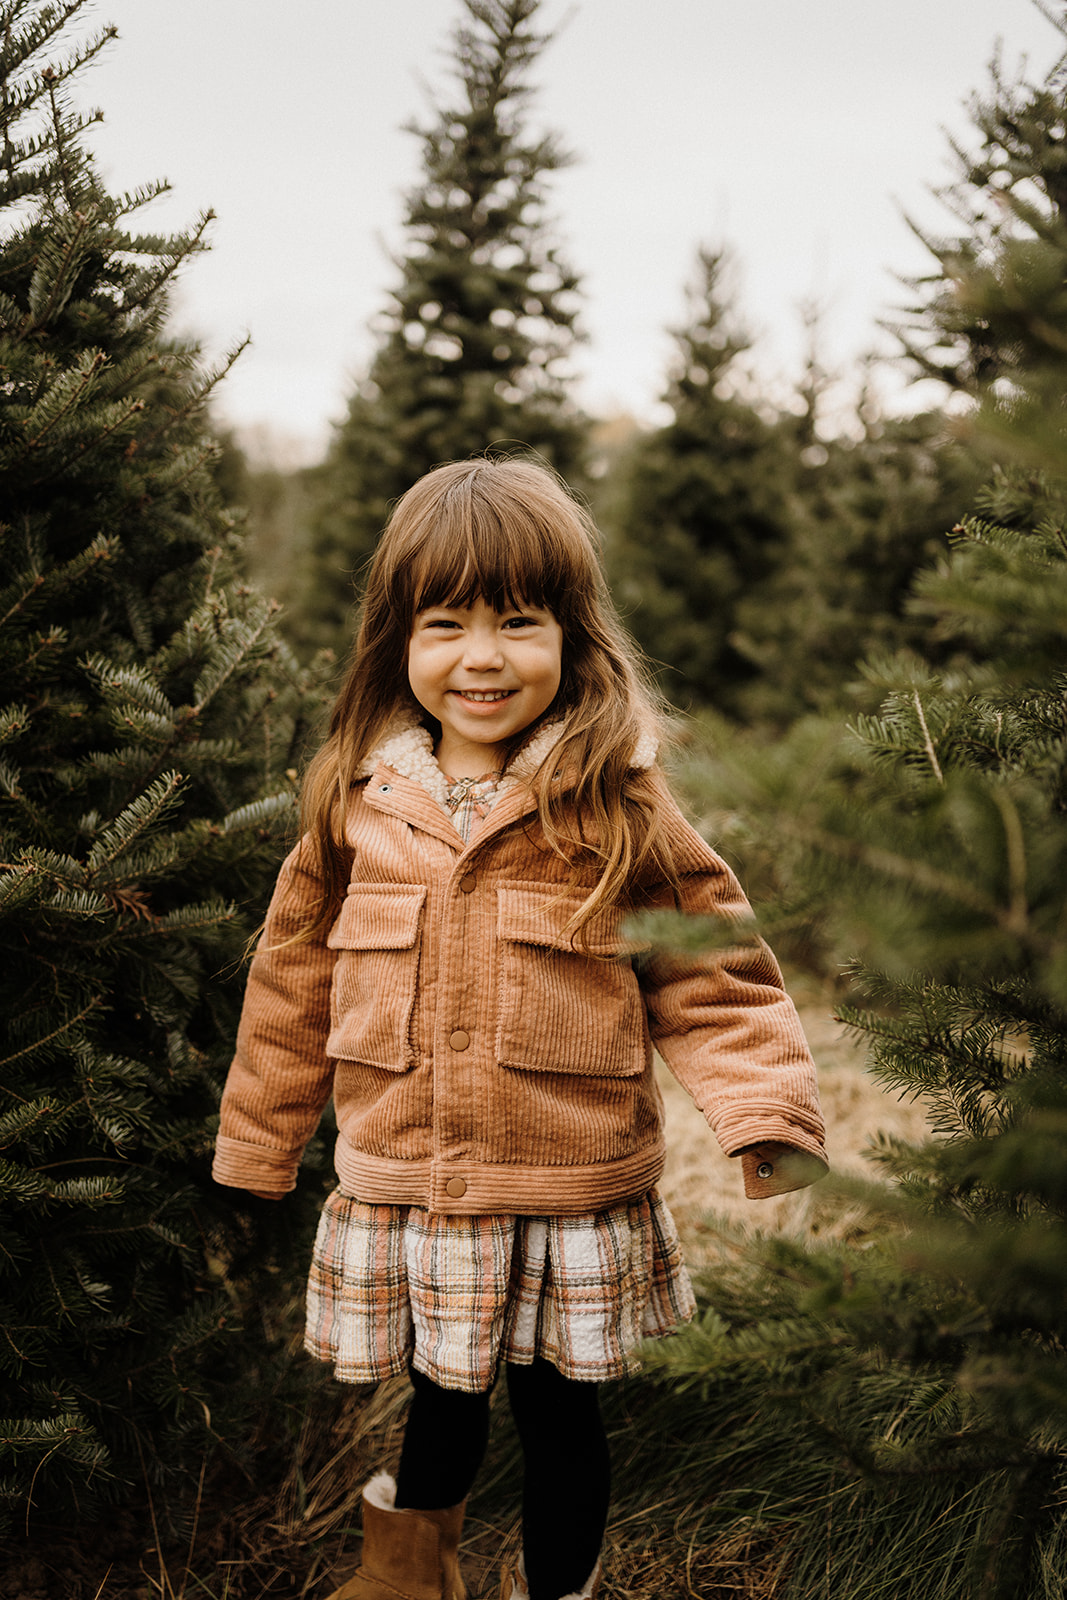 A child standing outside in front of Christmas Trees.